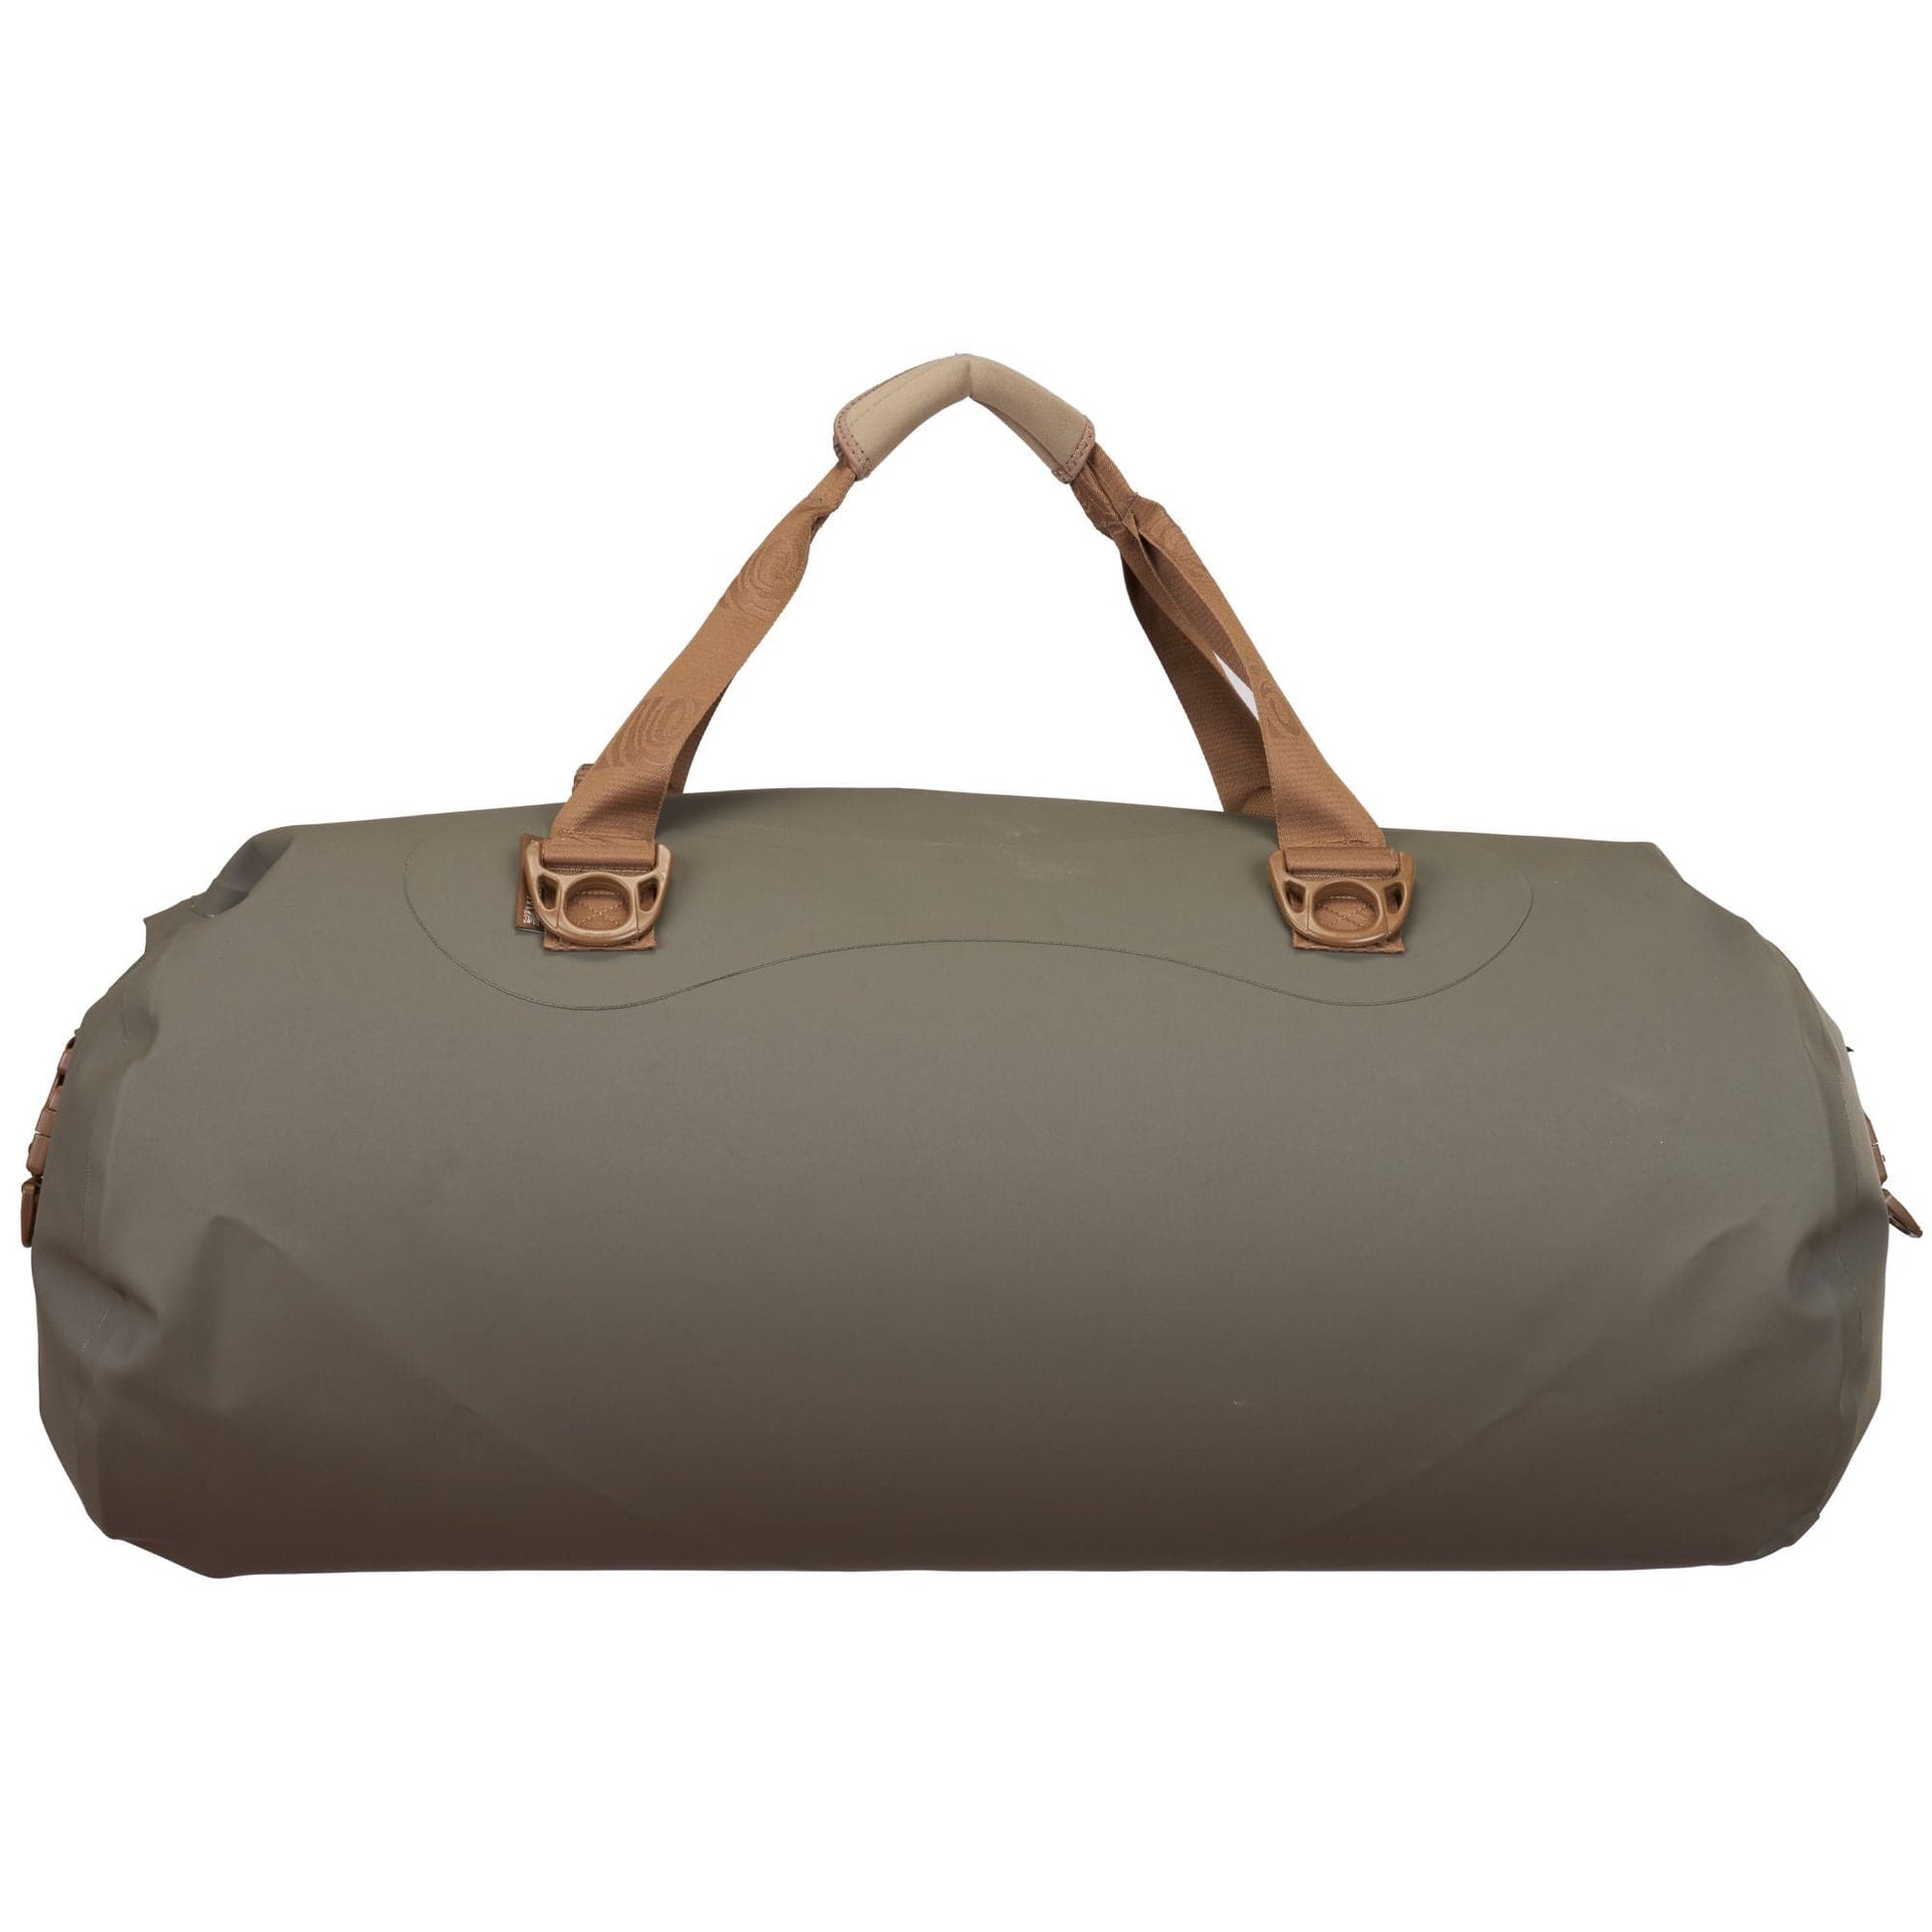 Featuring the Colorado Duffel dry bag manufactured by Watershed shown here from a fourth angle.